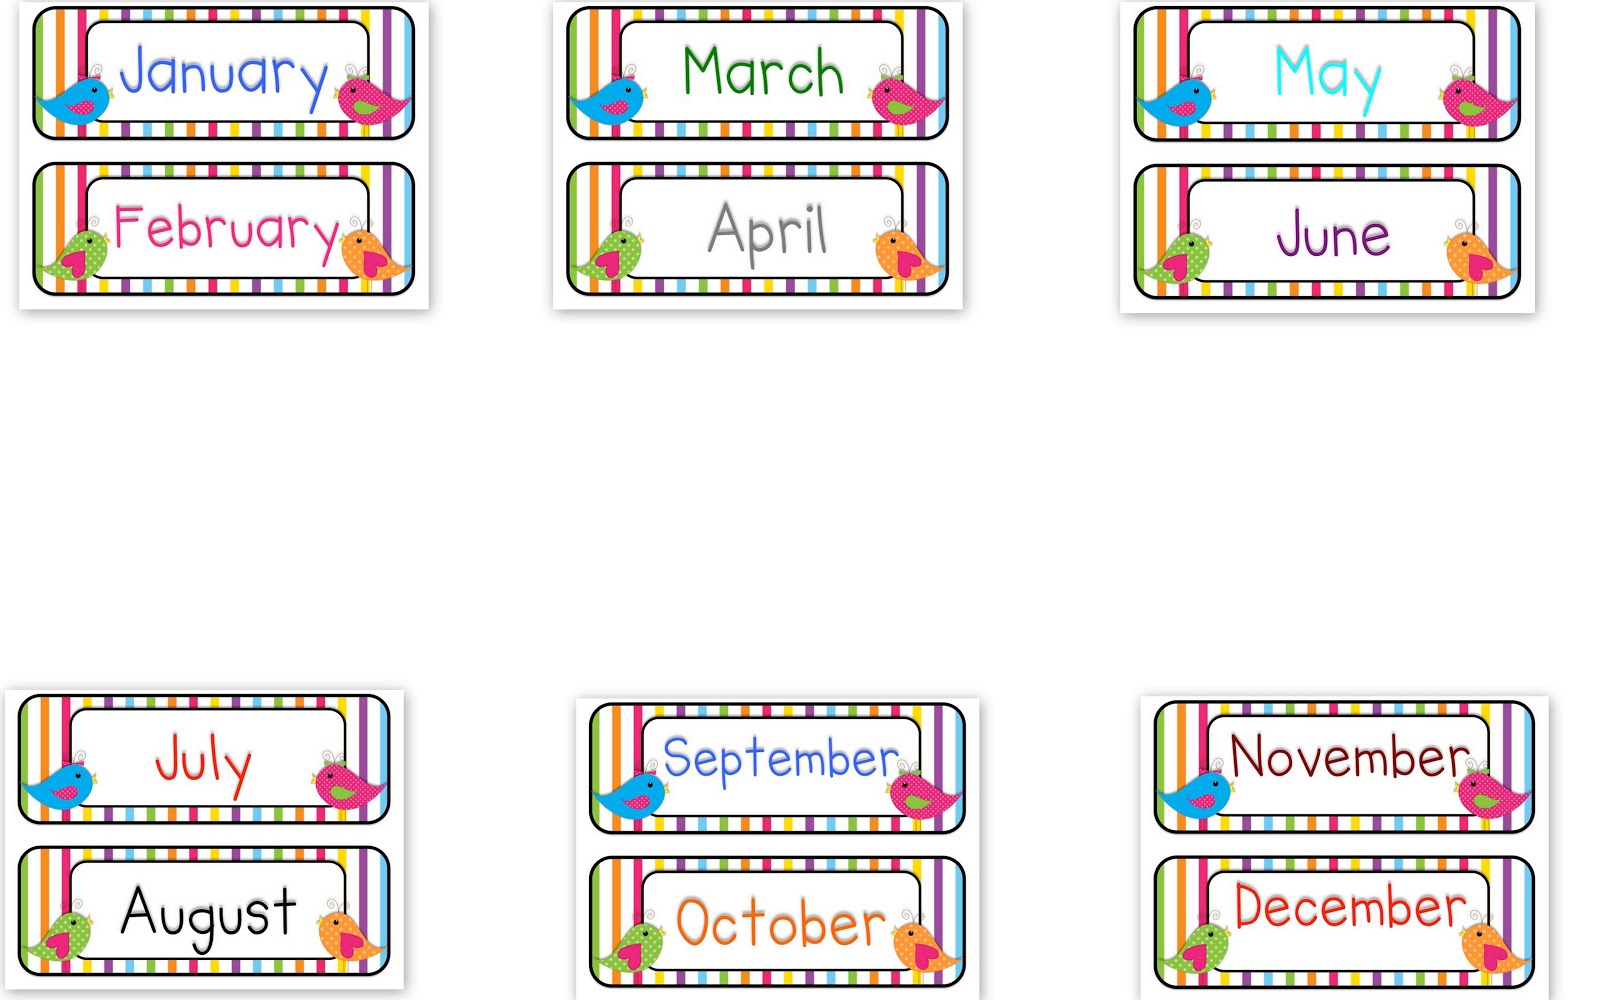 Months of the year preschool clipart 